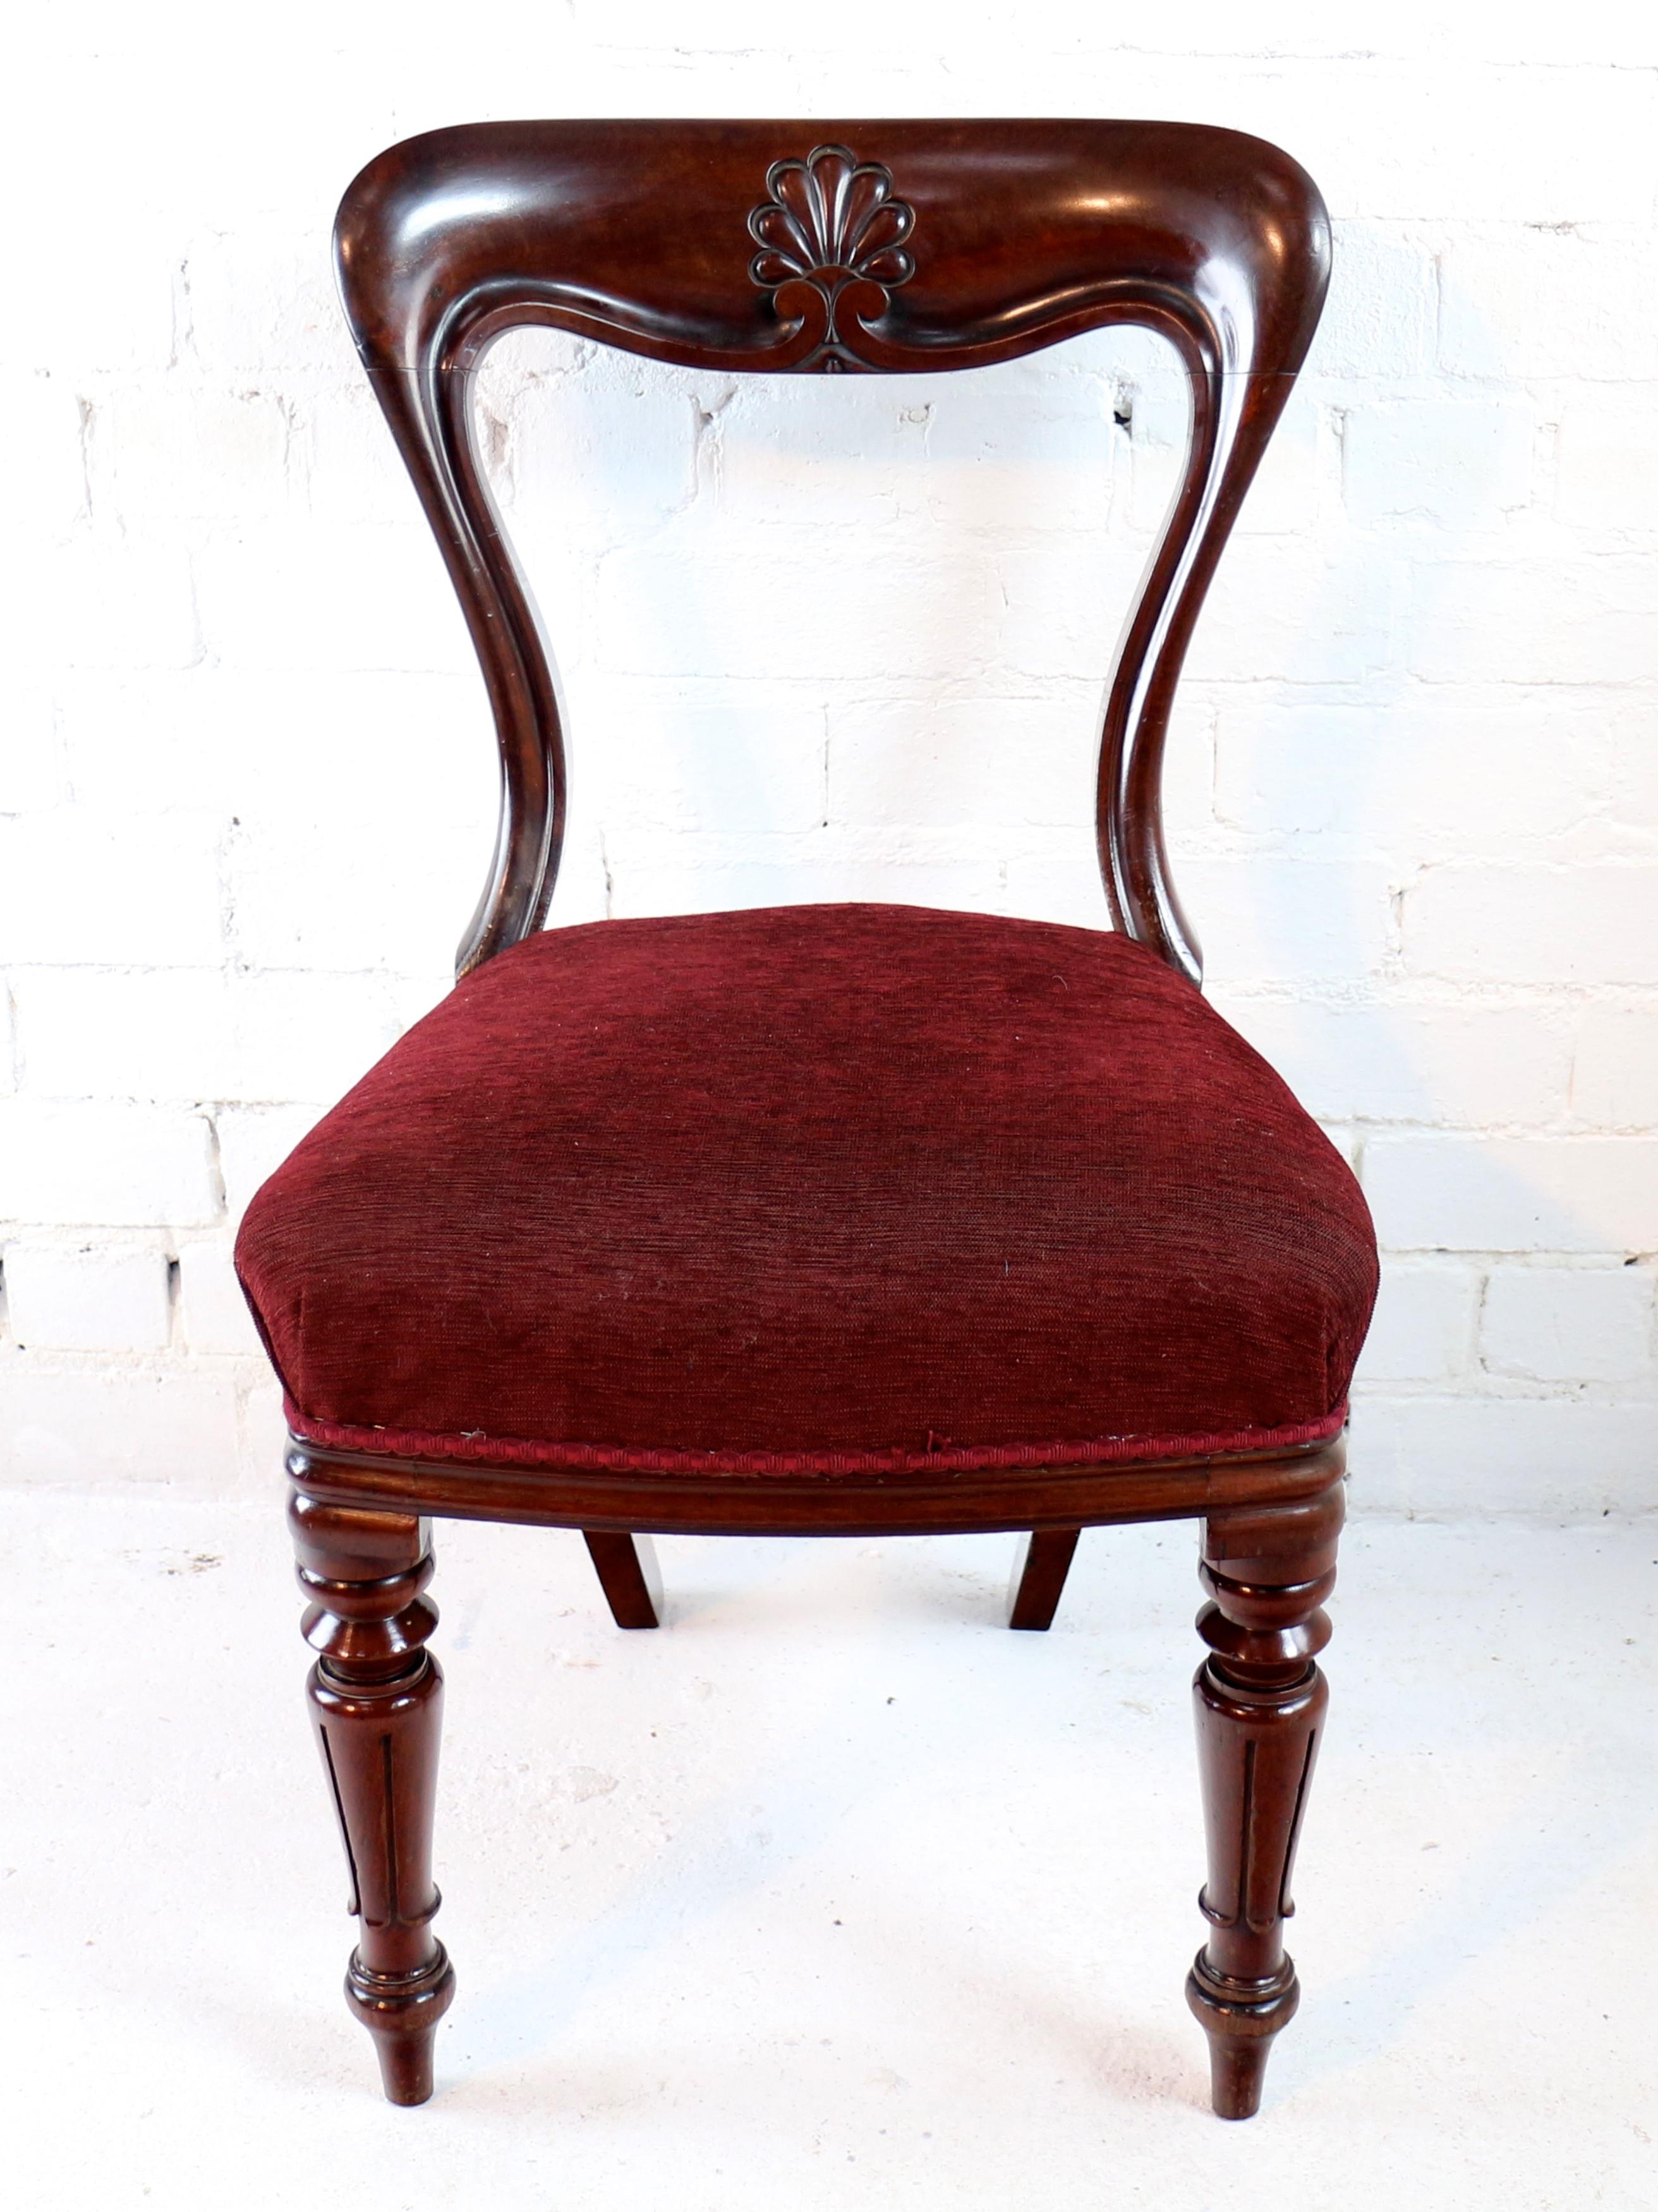 Upholstery Set of 10 Antique English William IV Mahogany Dining Chairs by J Proctor For Sale